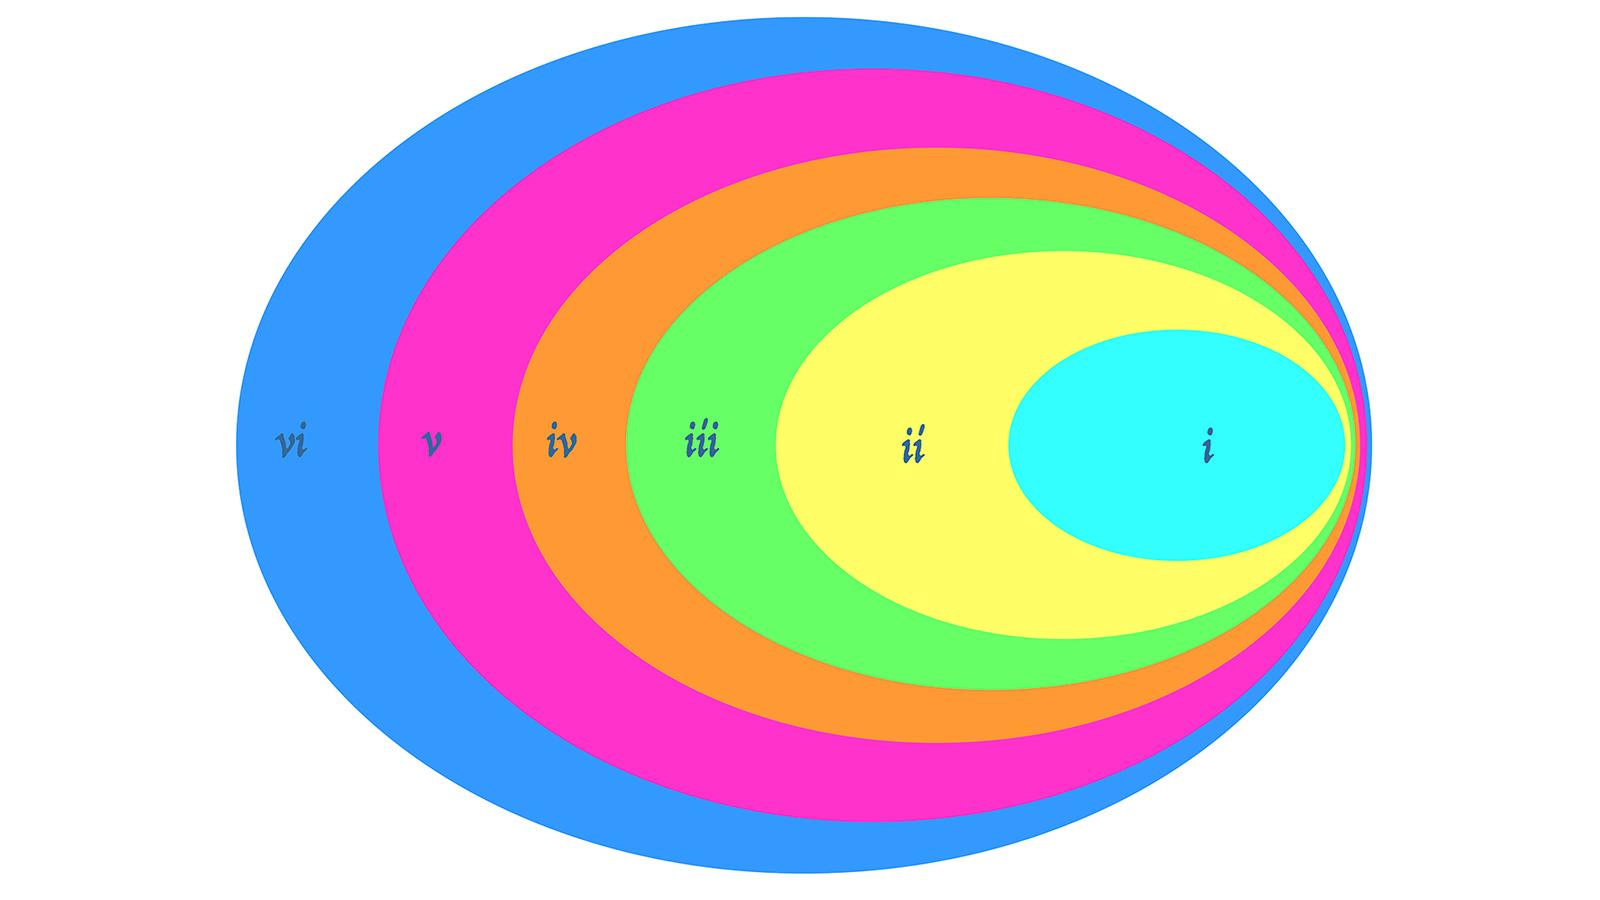 Concentric ovals of varying bright colors. Each circle is numbered with Roman numerals 1-6